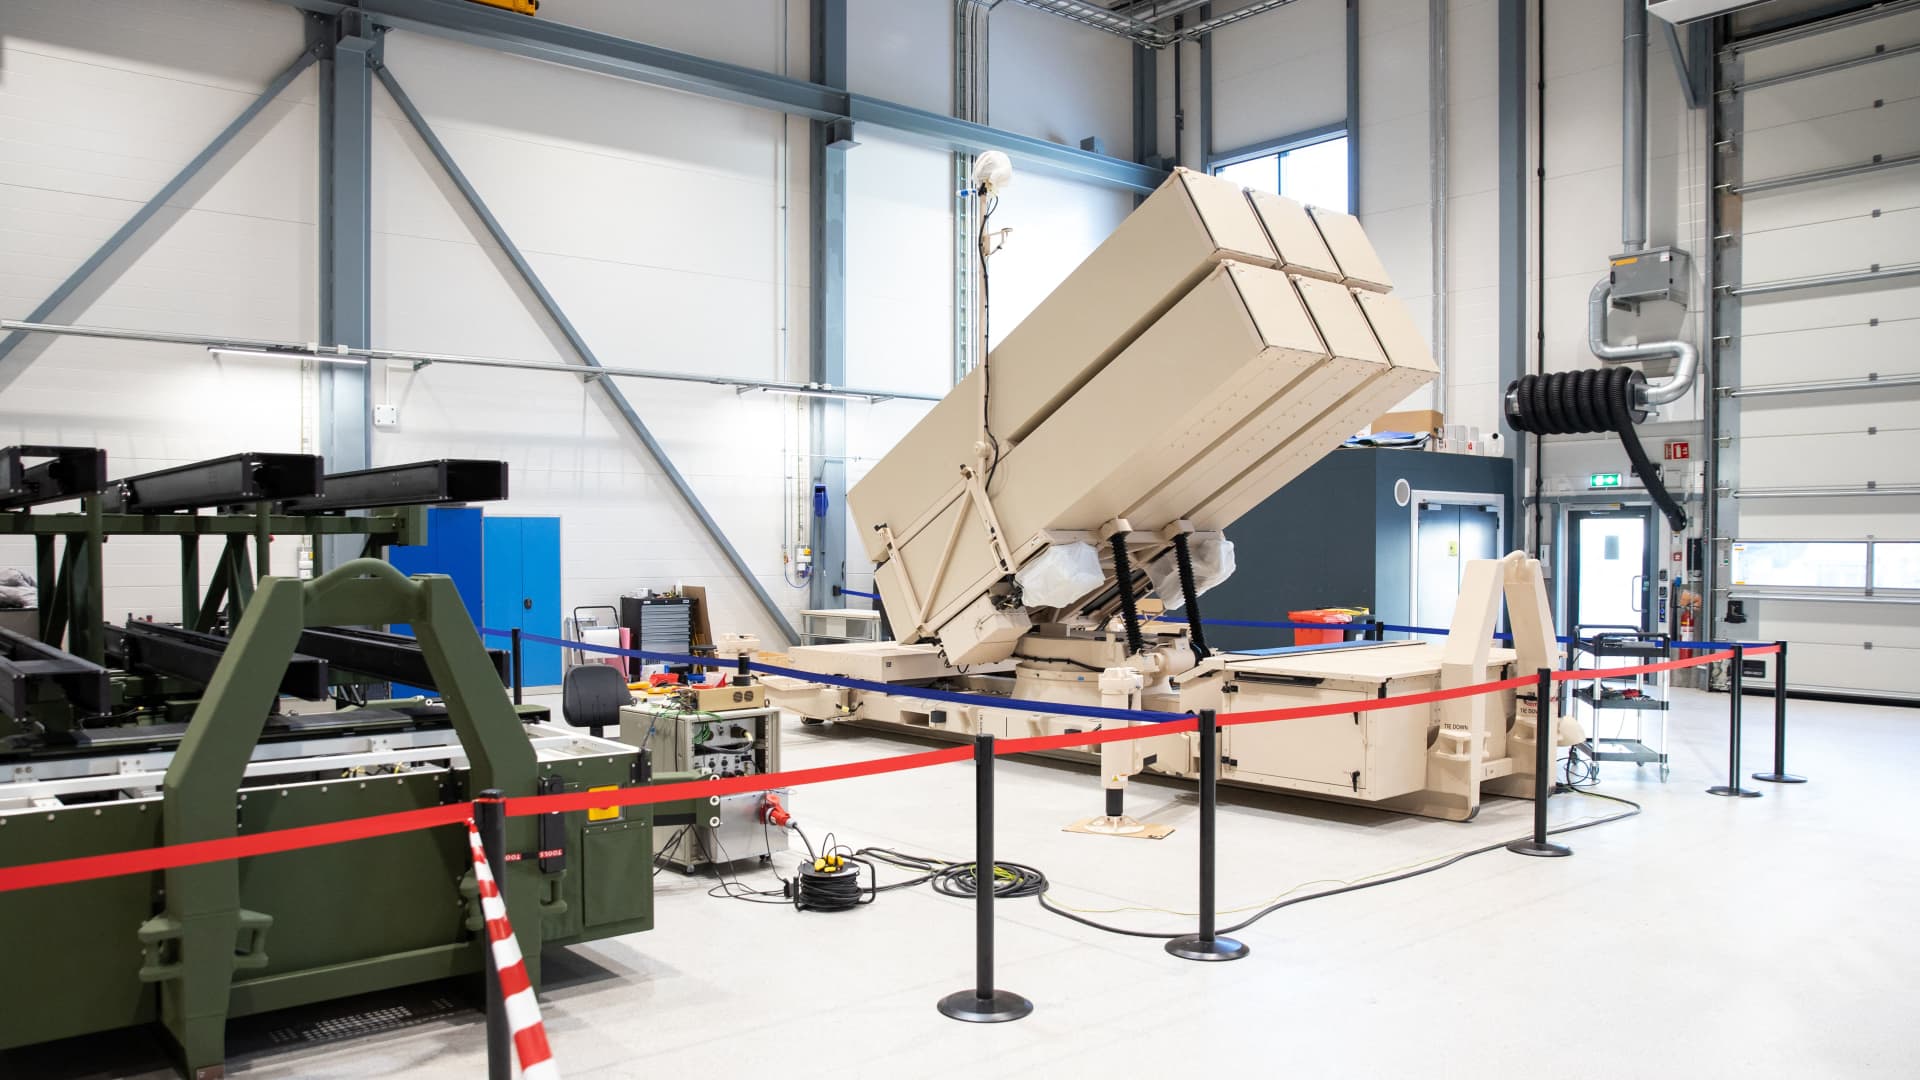 A NASAMS surface-to-air missile launcher is seen during production at the assembly line of the Kongsberg Defence & Aerospace weapons factory in Kongsberg, Norway on January 30, 2023.